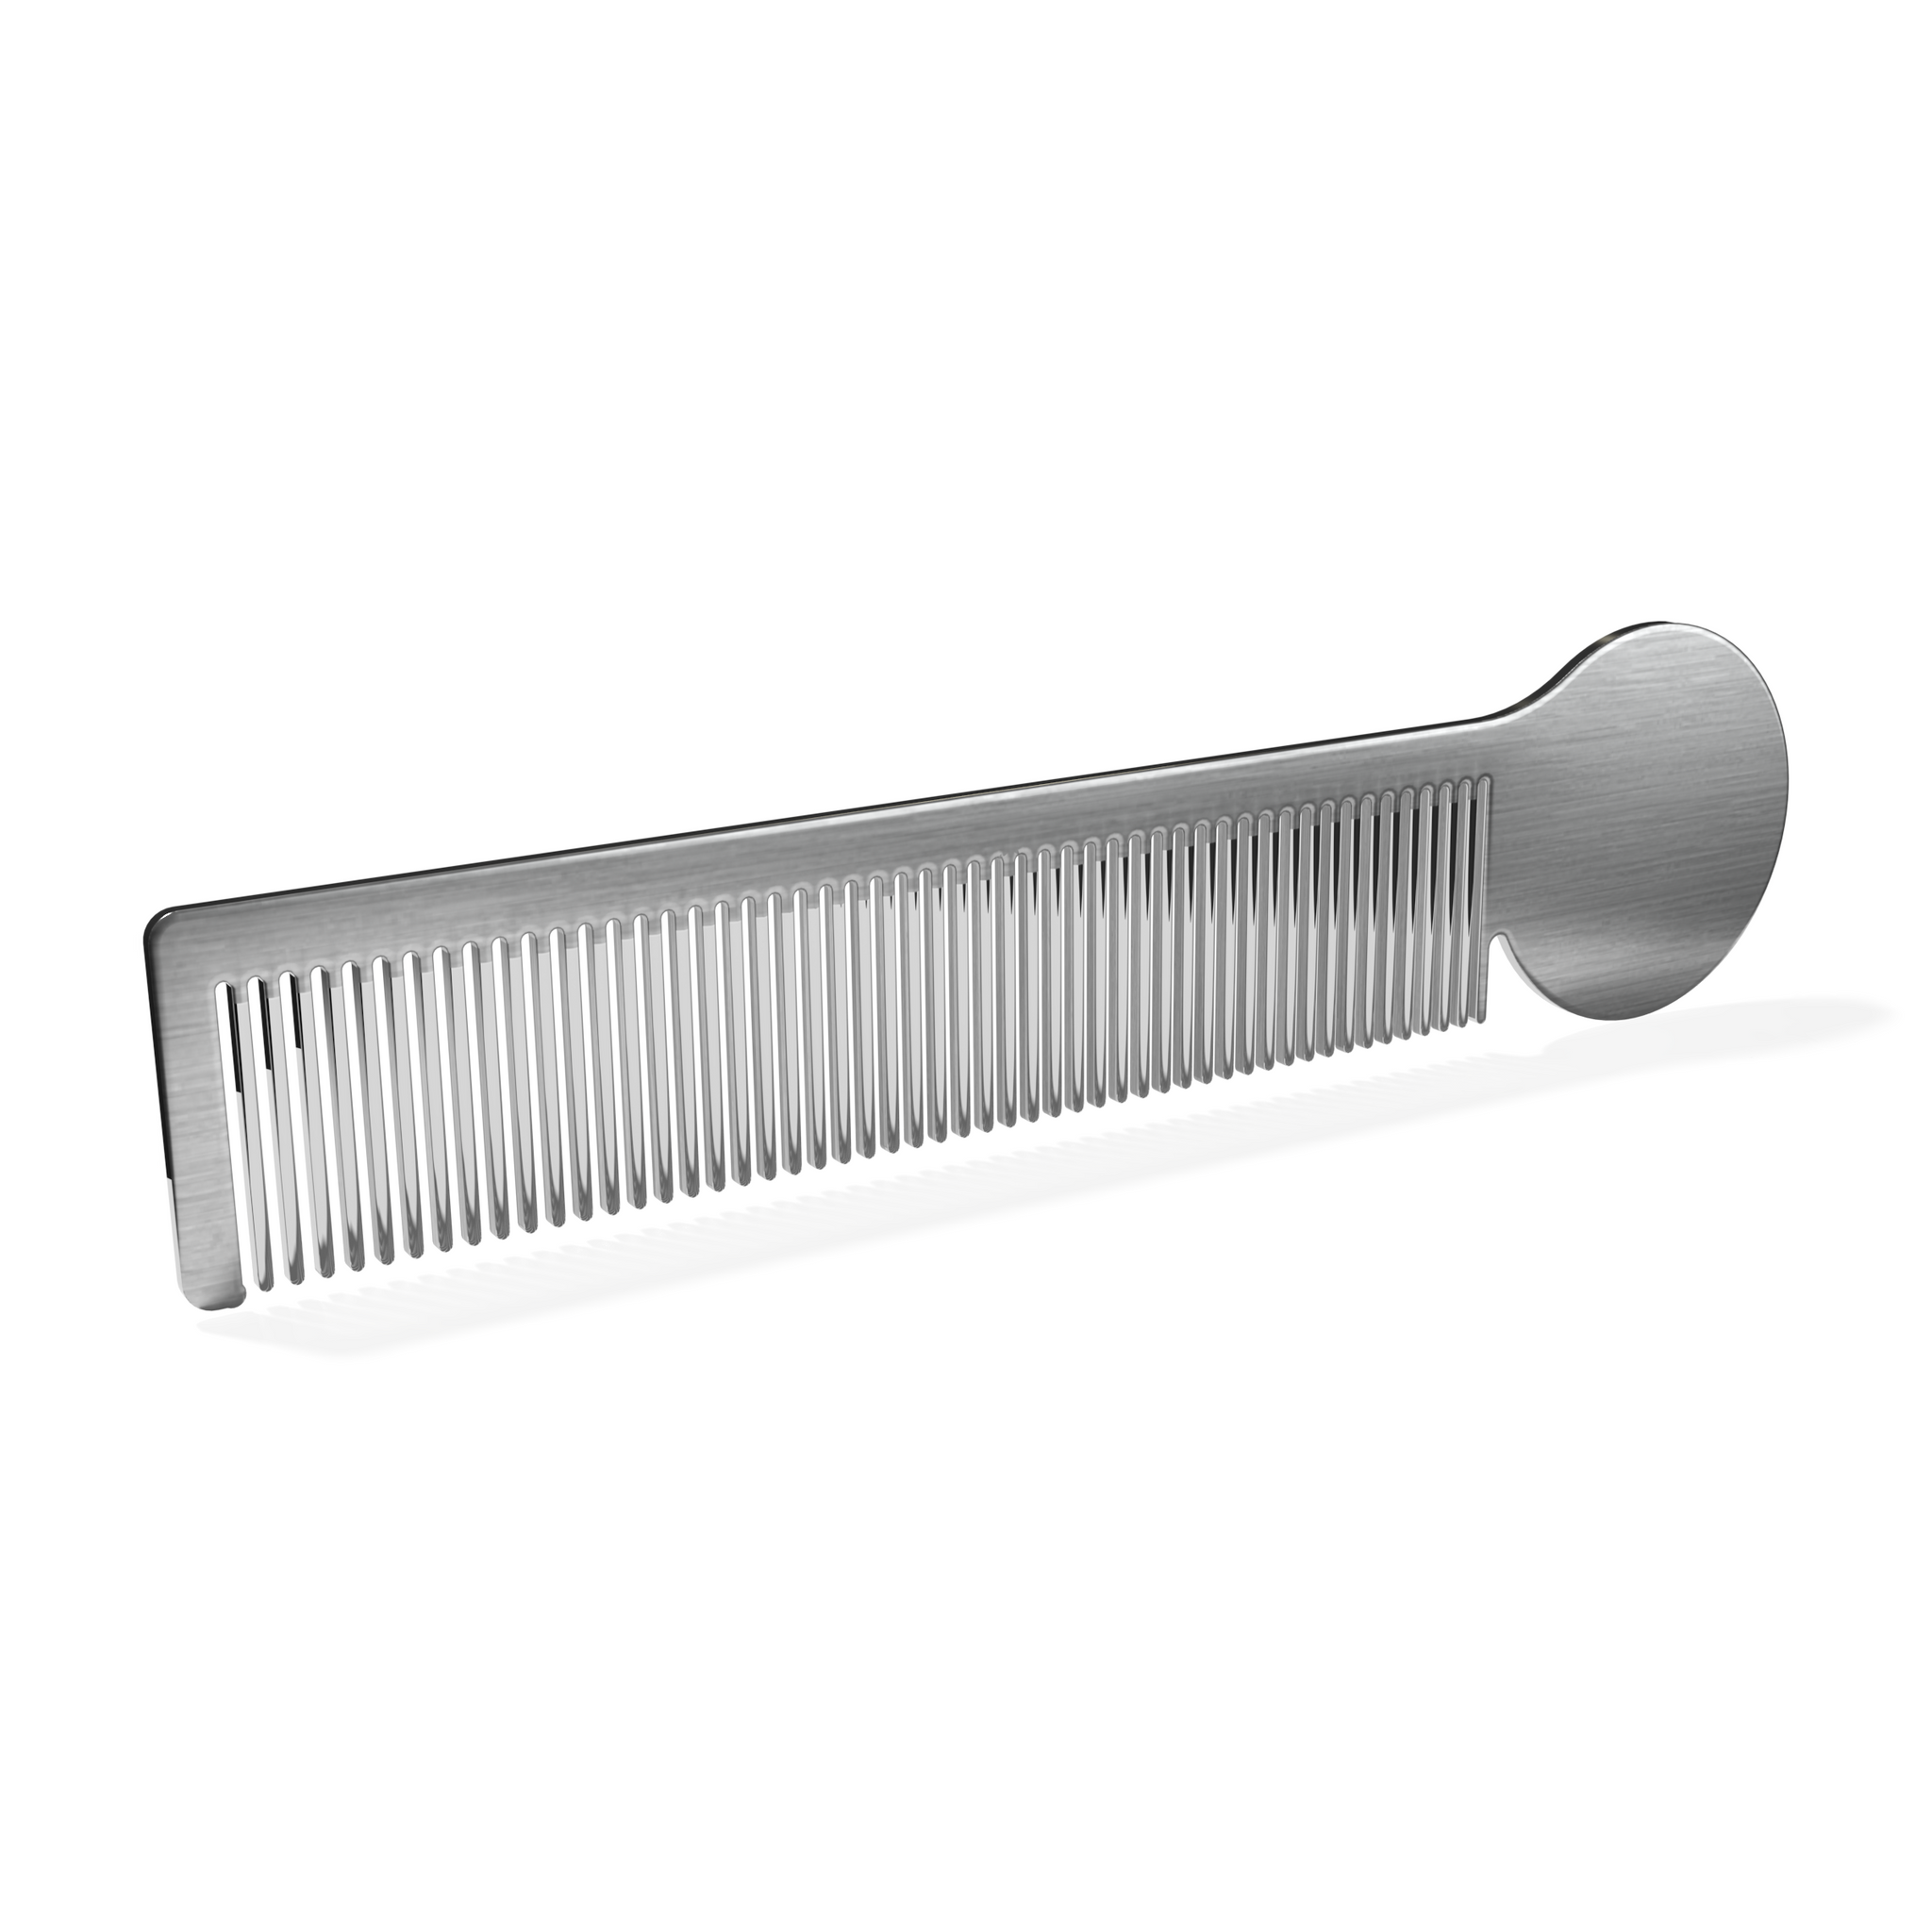 Stainless Moustache Comb Men's Grooming Beard Care